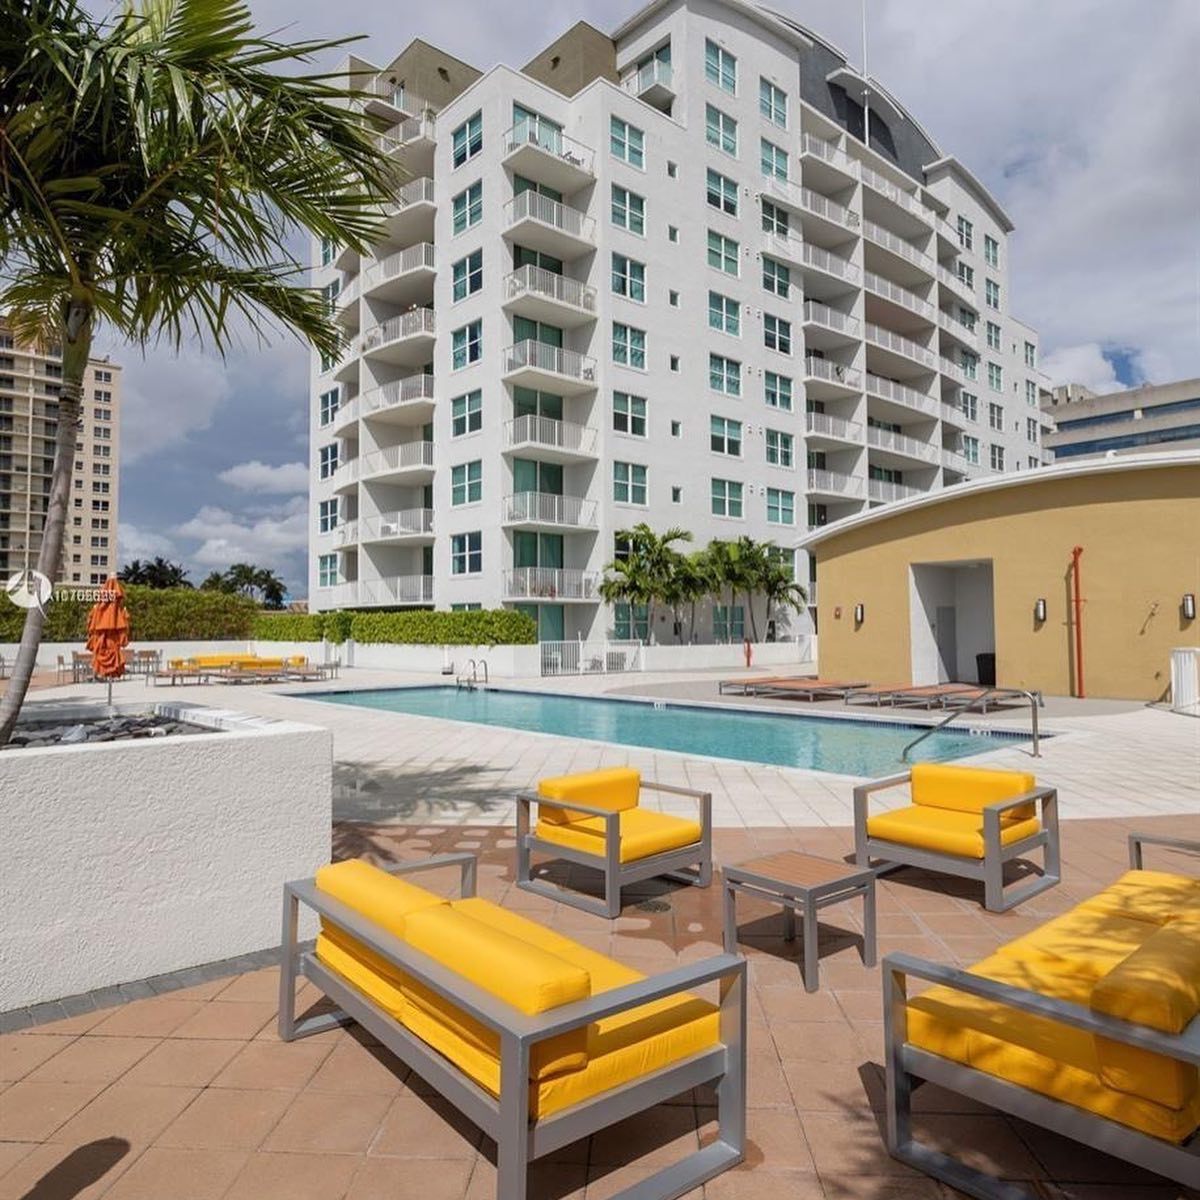 Coral Way condos with pool and yellow lounge seating. Photo by Instagram user @alexandraanovoo